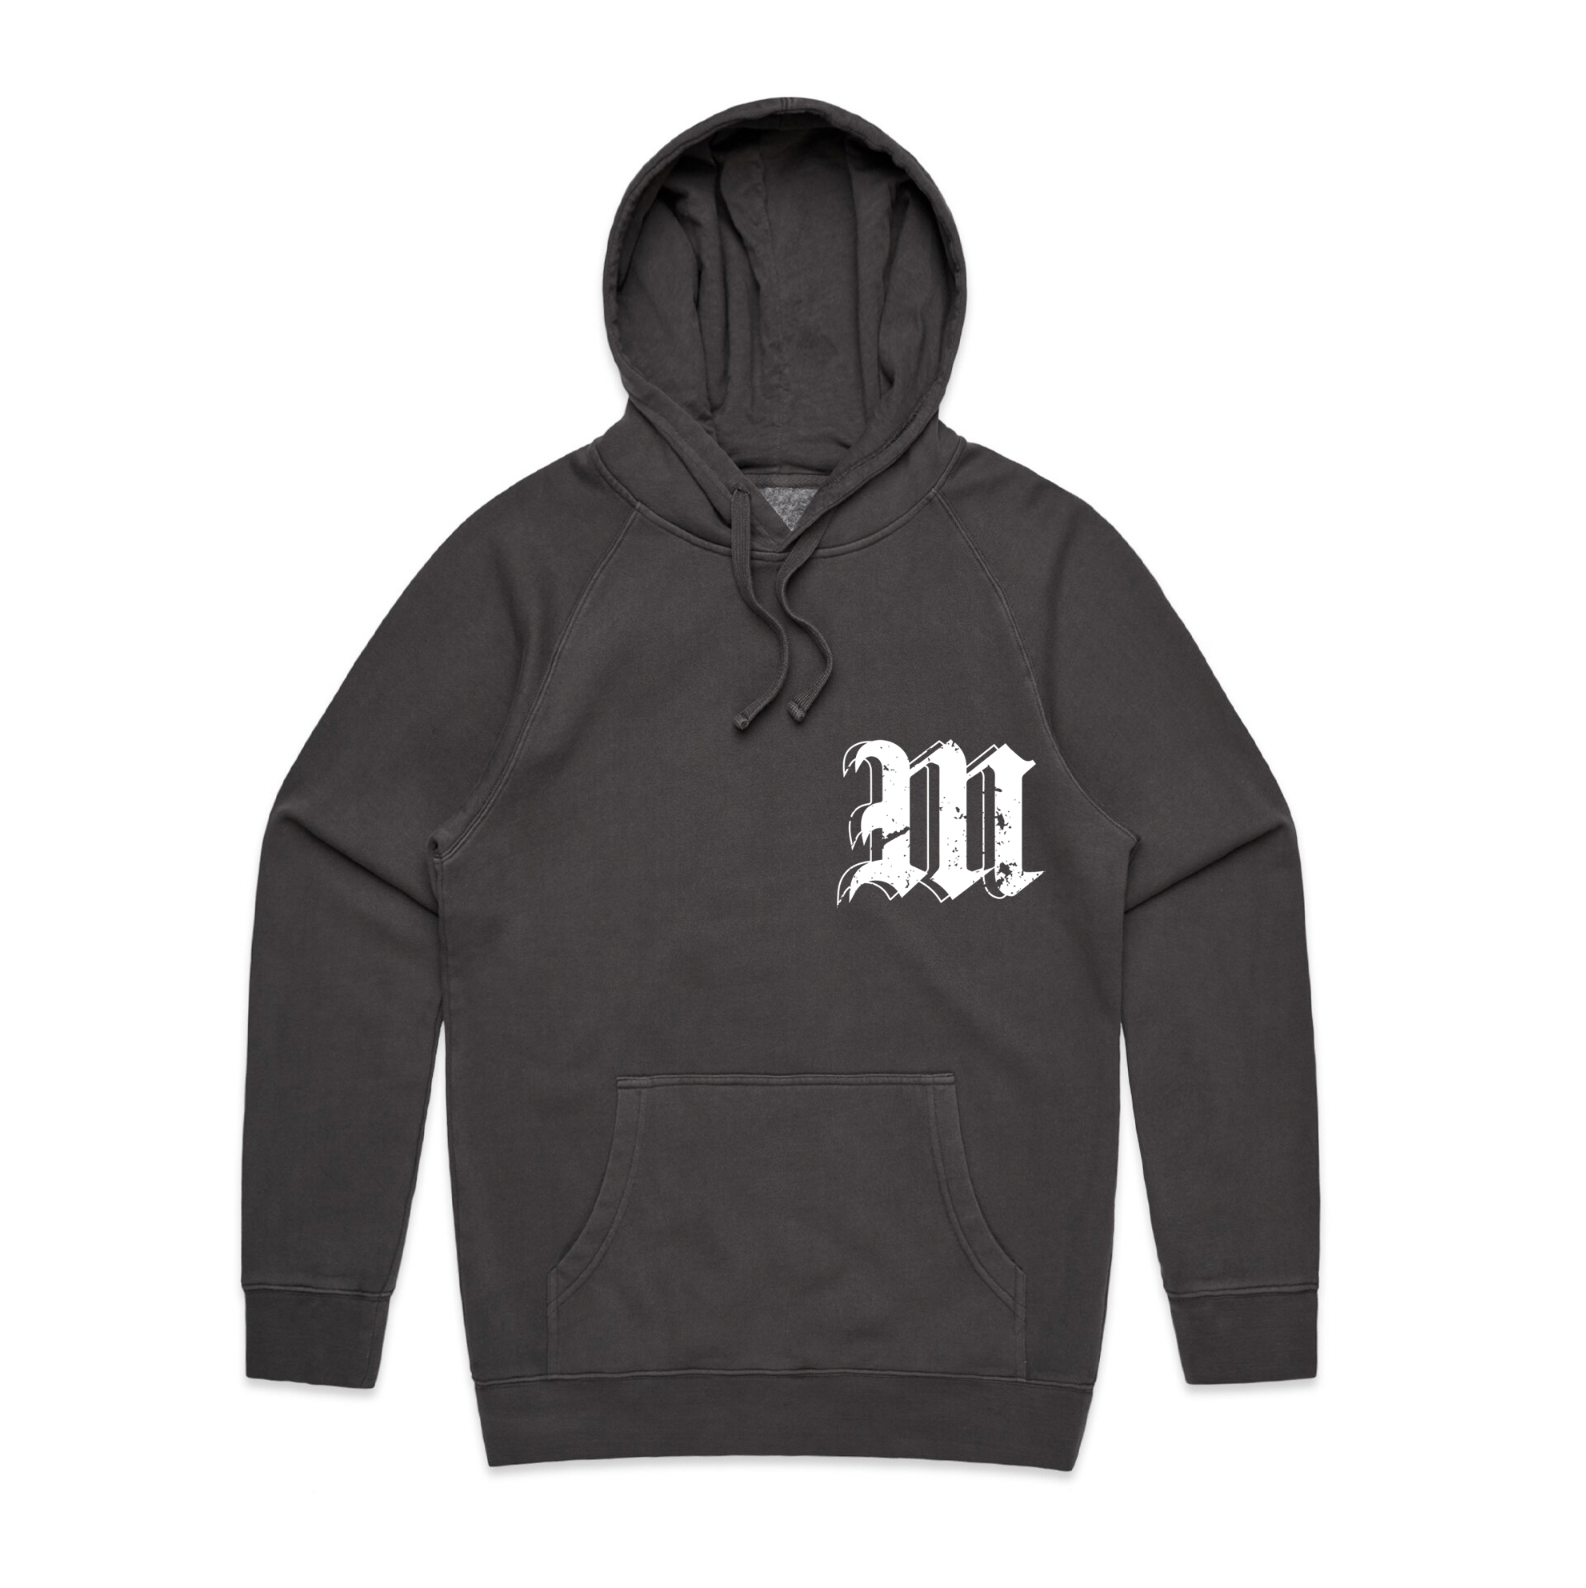 Make Moves Not Statements Luxury Hoodie featuring 100% cotton and is heavy fleece. The front of the luxury hoodie features a corner logo. 